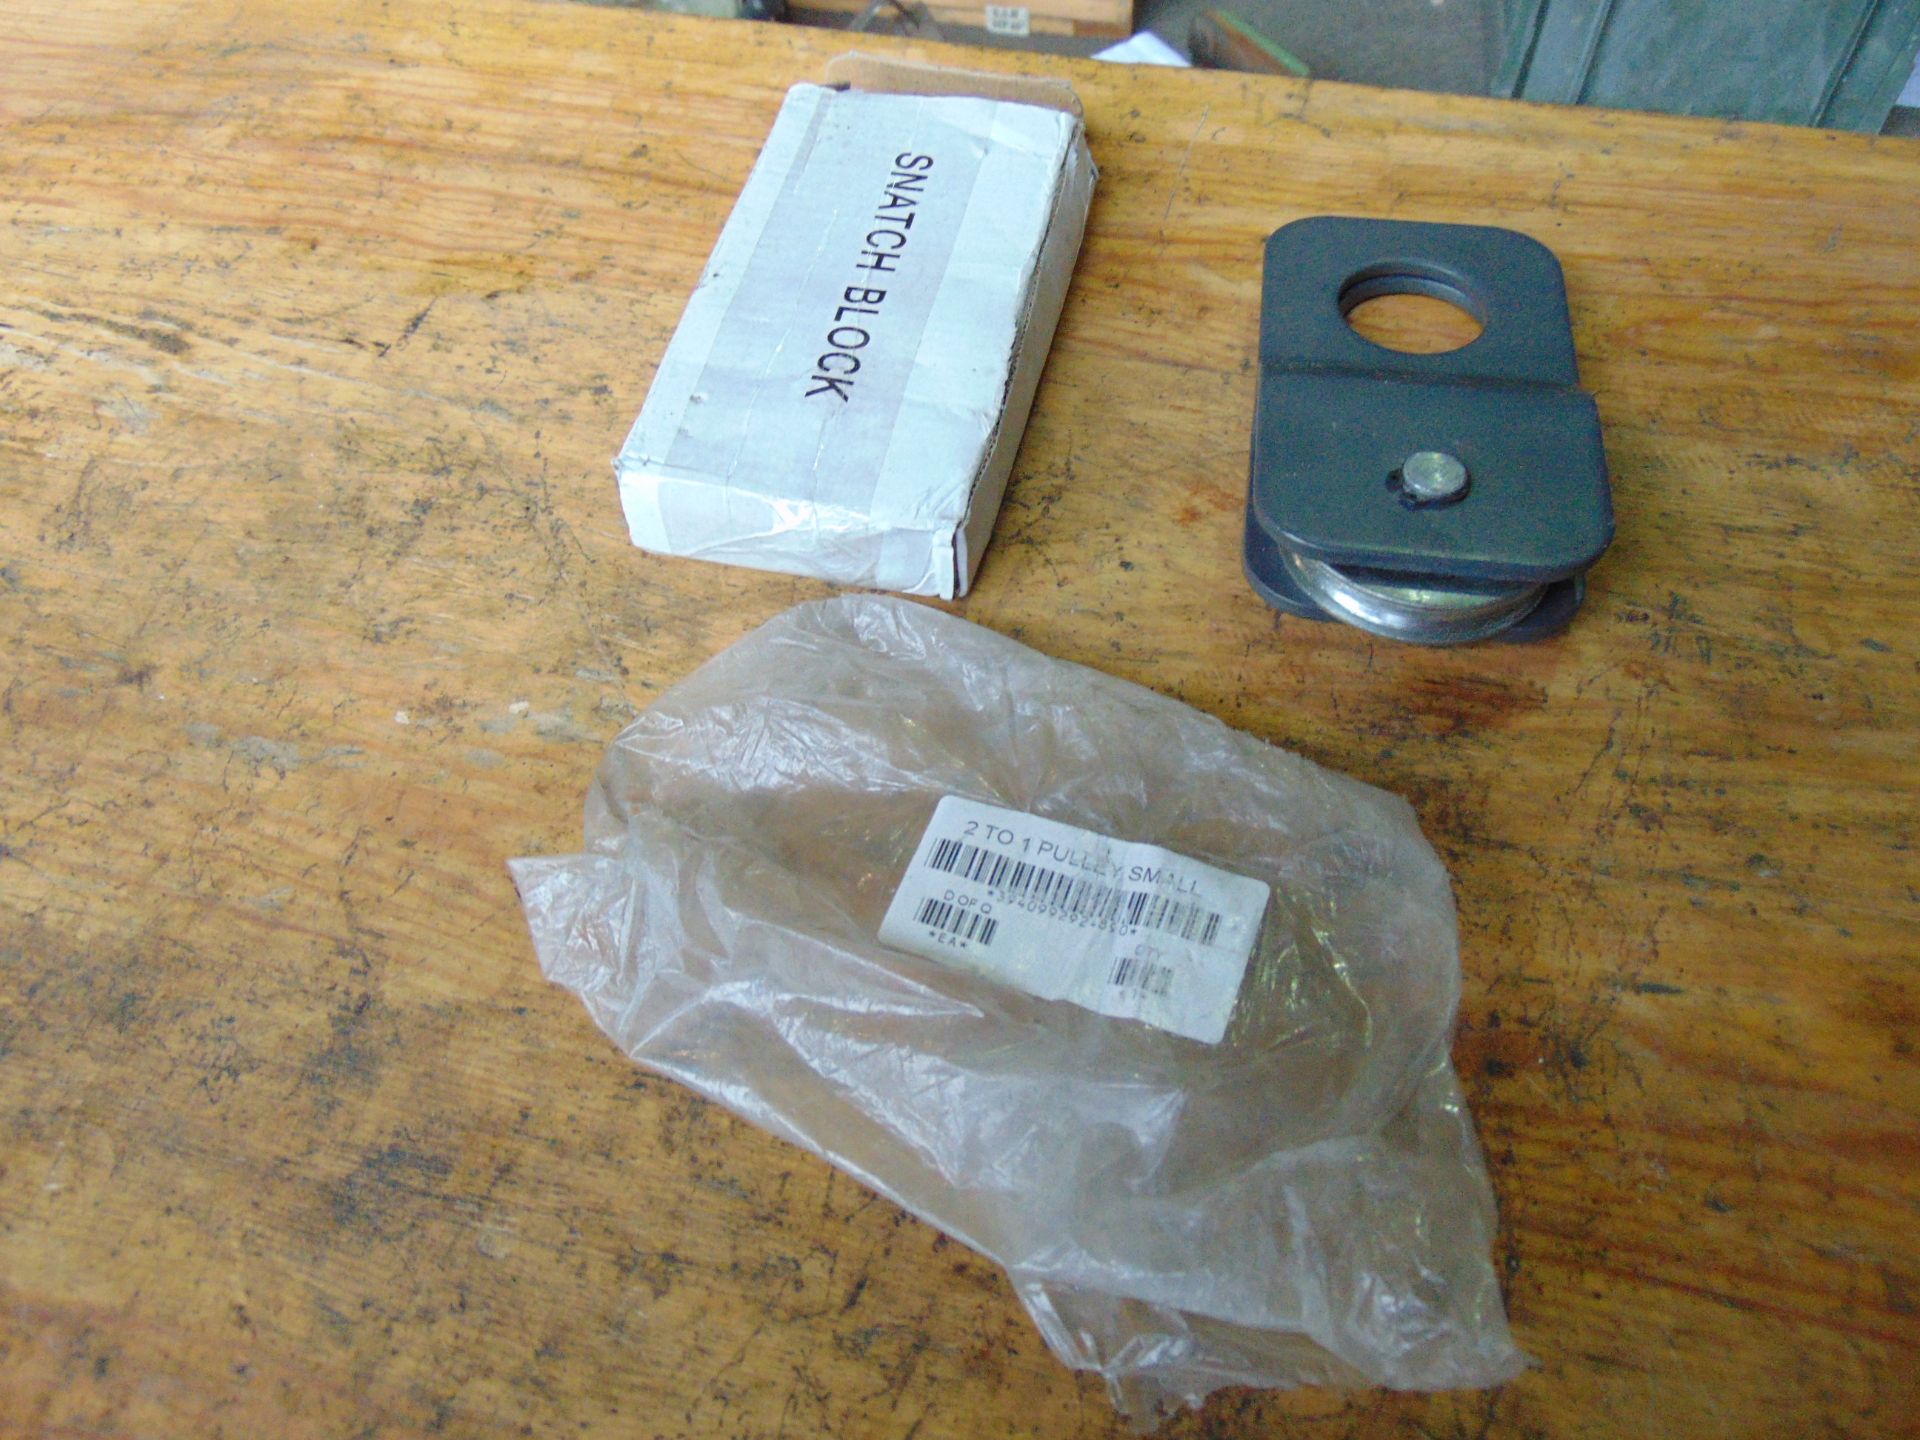 2 to 1 Pull New Unissued Land Rover Winching Snatch Block - Image 3 of 6